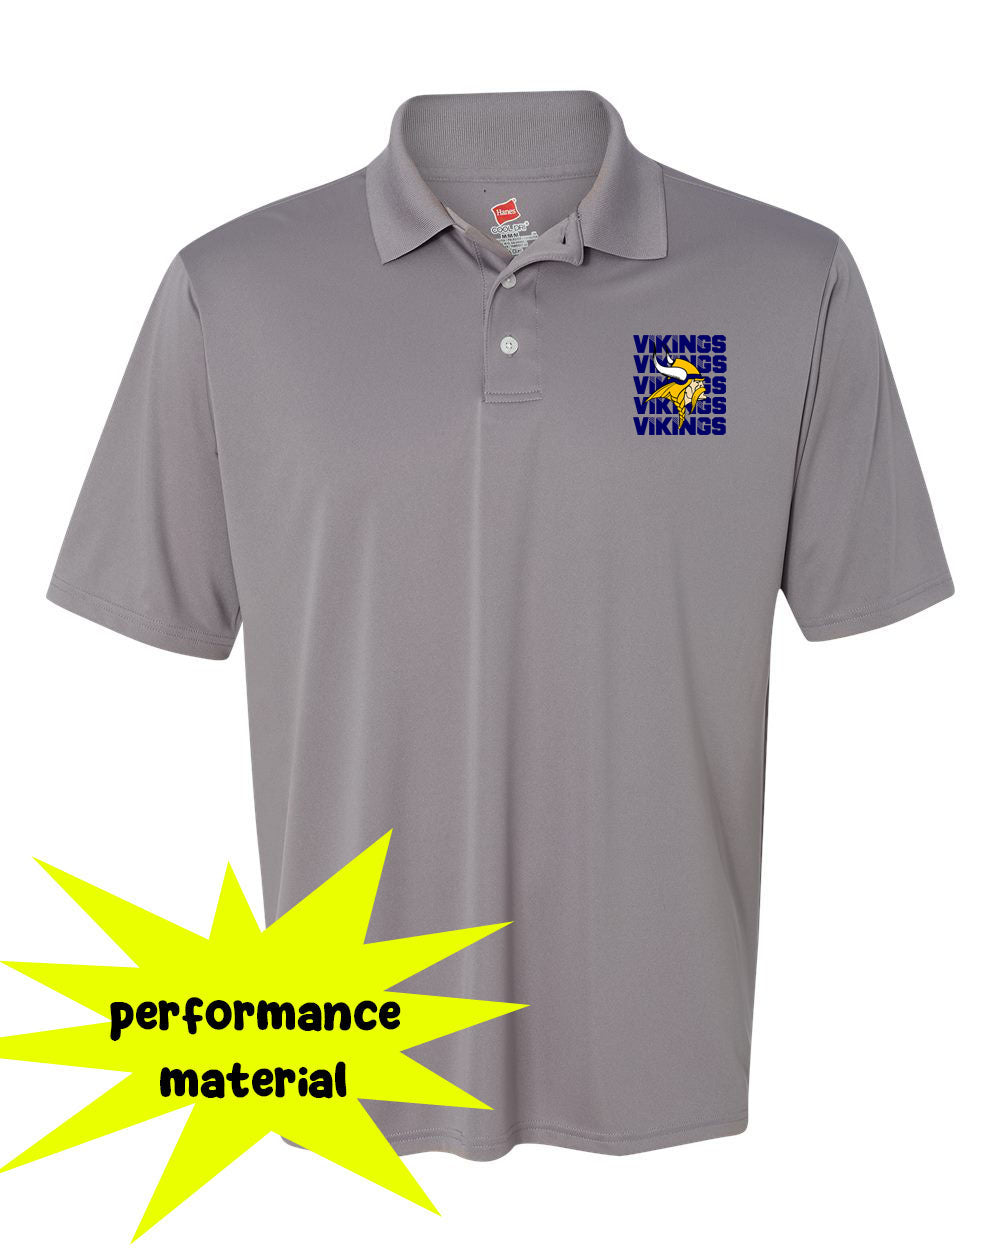 Rolling Hills Performance Material Polo T-Shirt Design 8